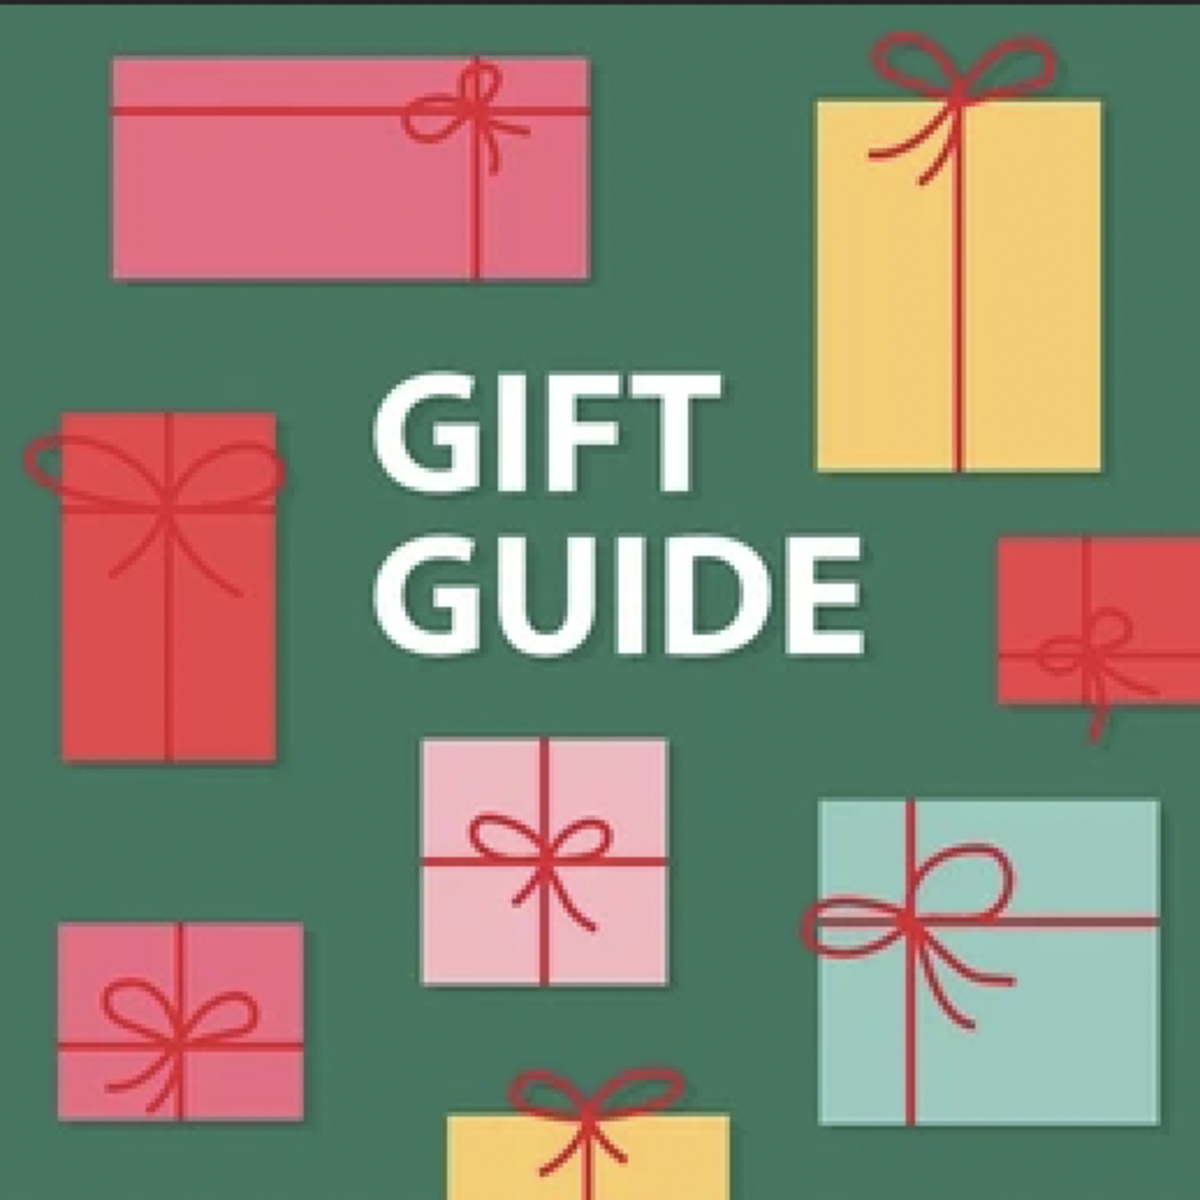 birthday gift: Birthday Gift Guide: Gifting made easy with